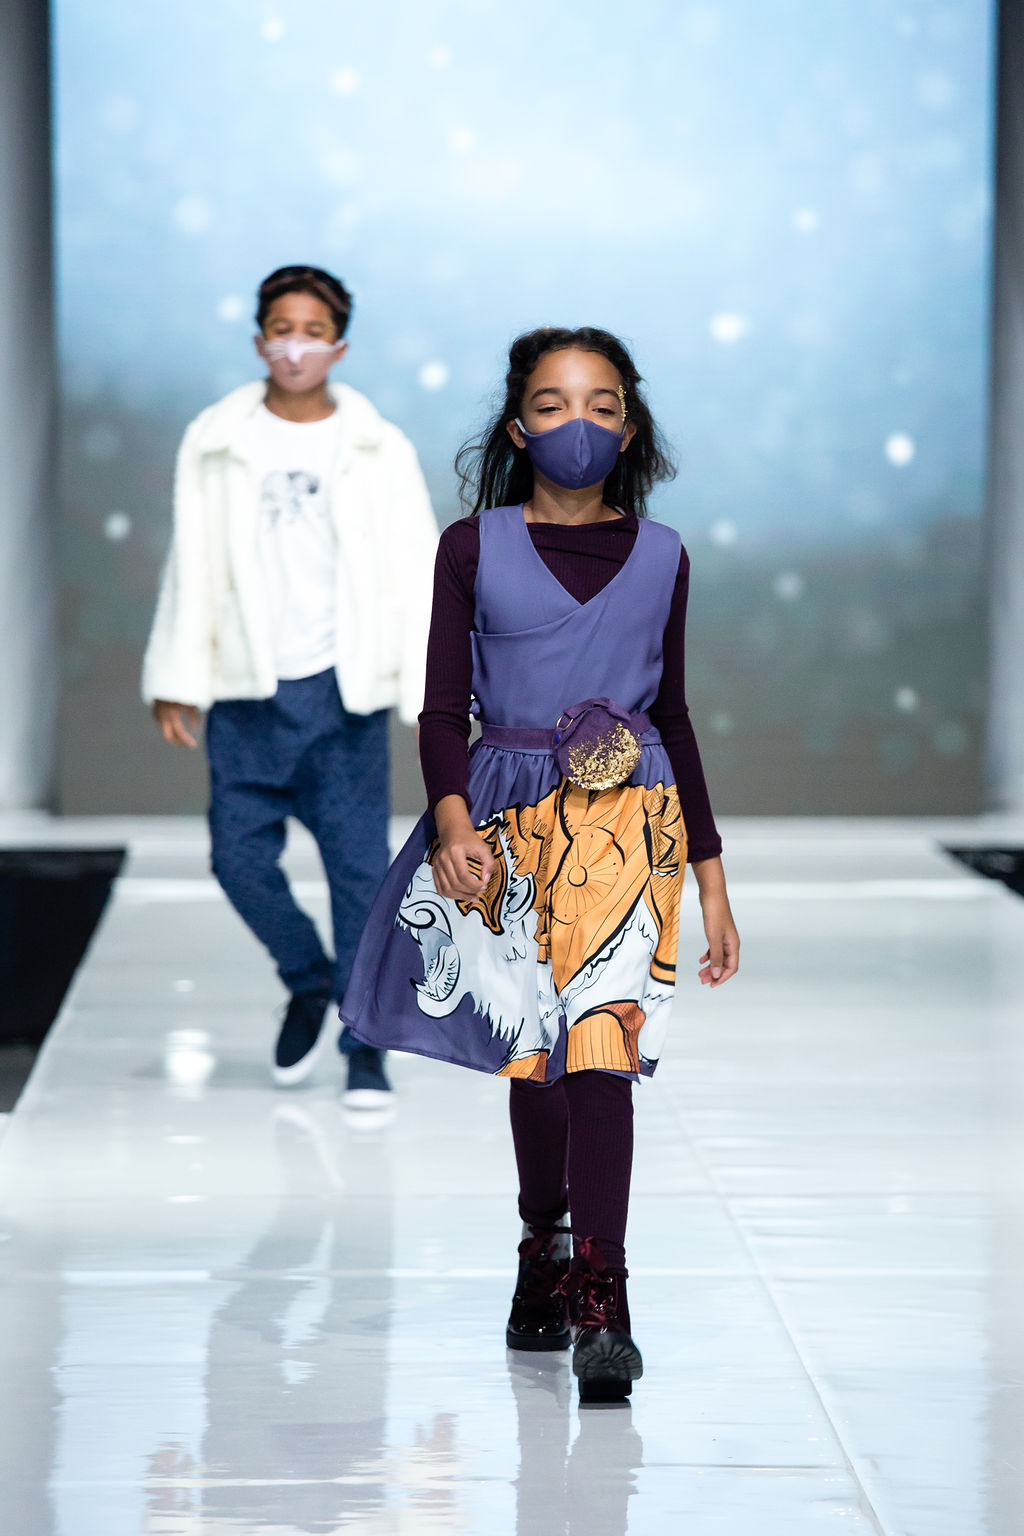 In her lorek dress, this young lady walks the runway pairing it with purple knit tunic and leggings